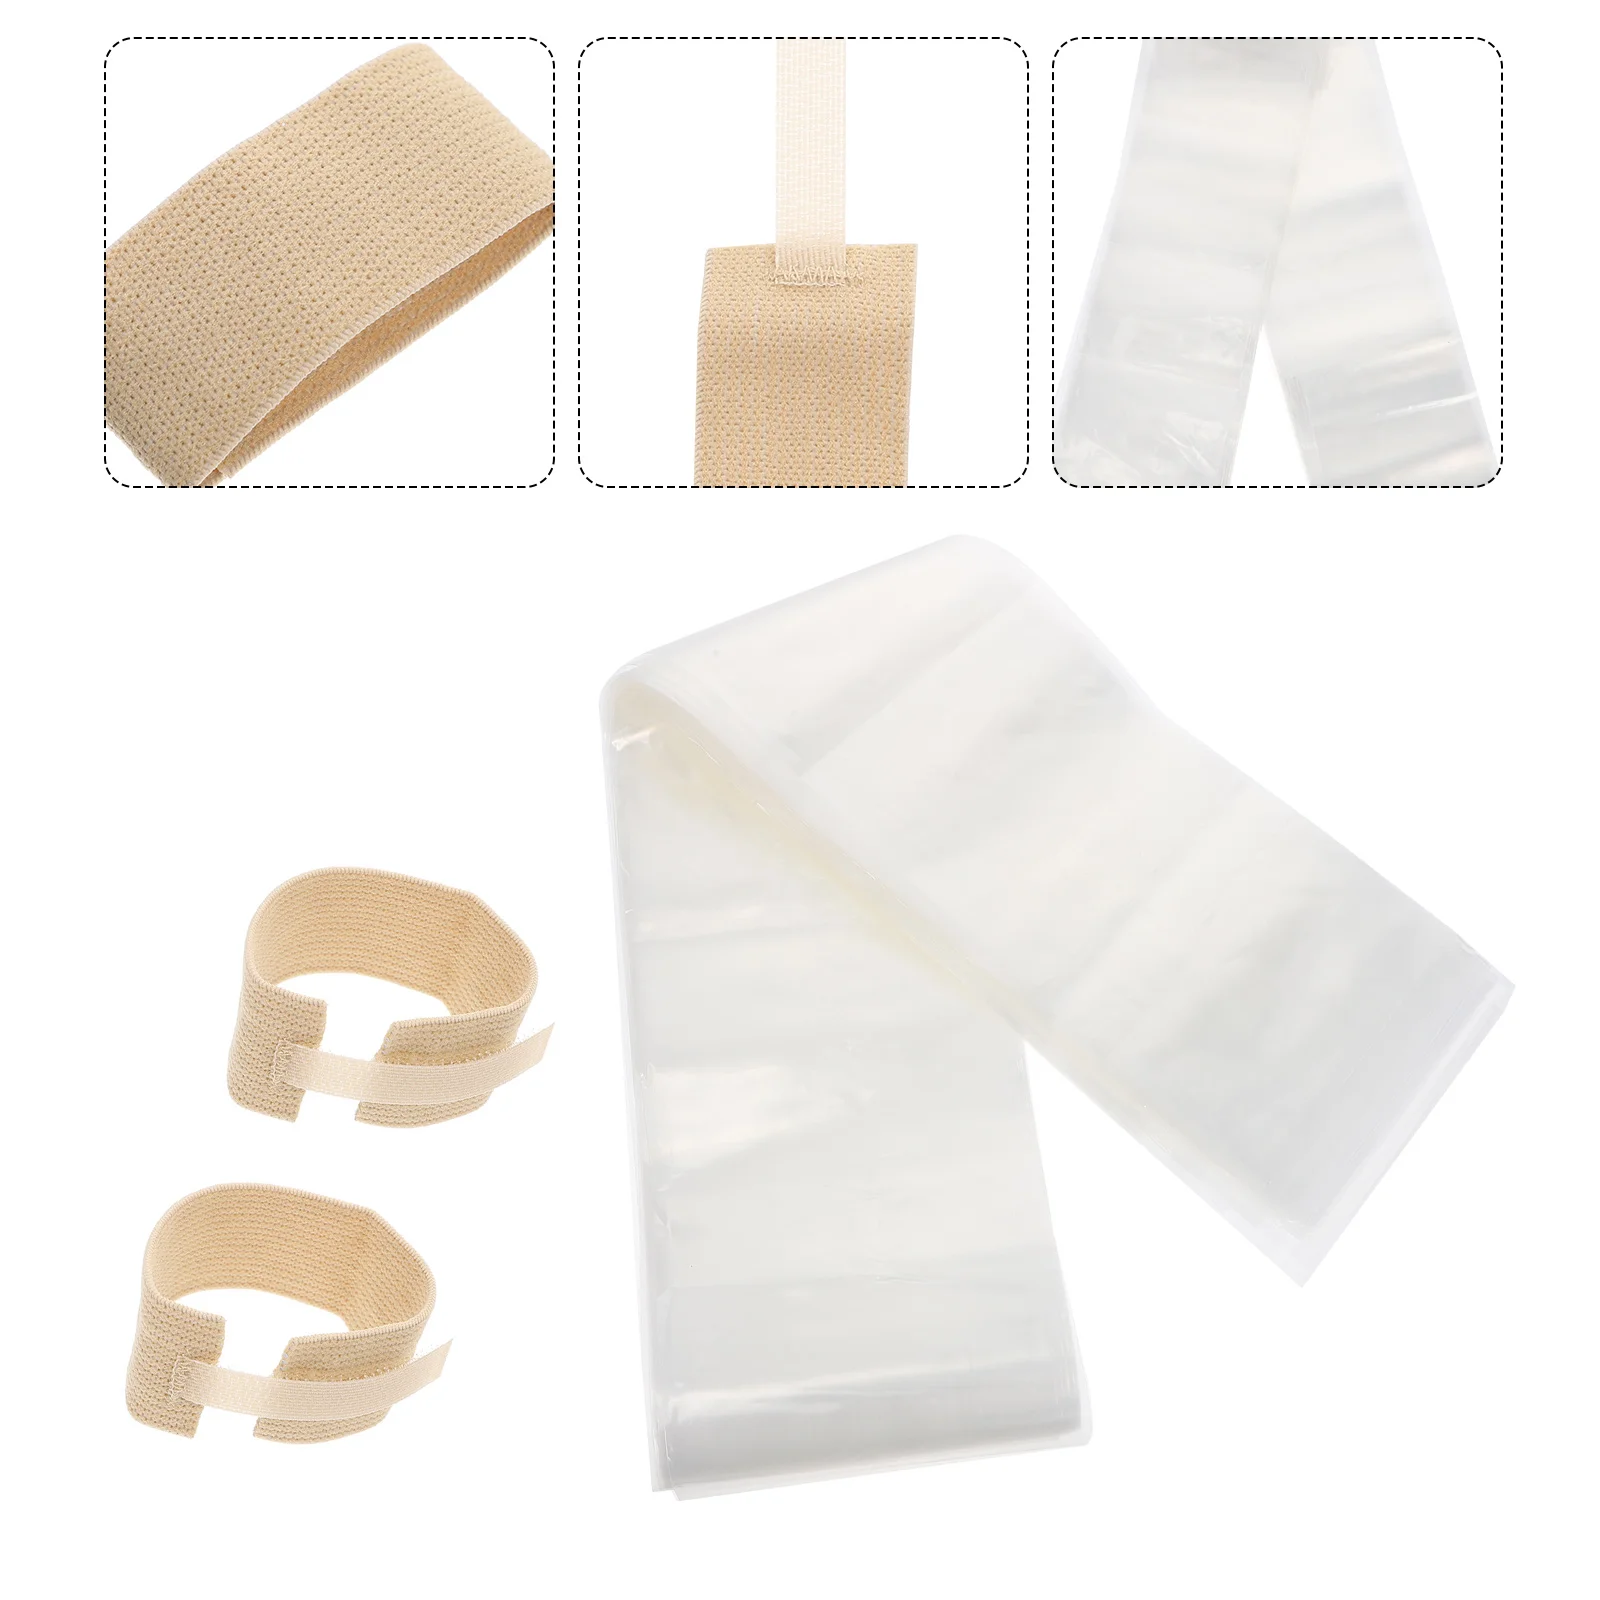 

30 Pcs Urine Collection Bag Portable Urinal Packet Travel Urinal Chamber Urinary Large Capacity Barrel Outdoor